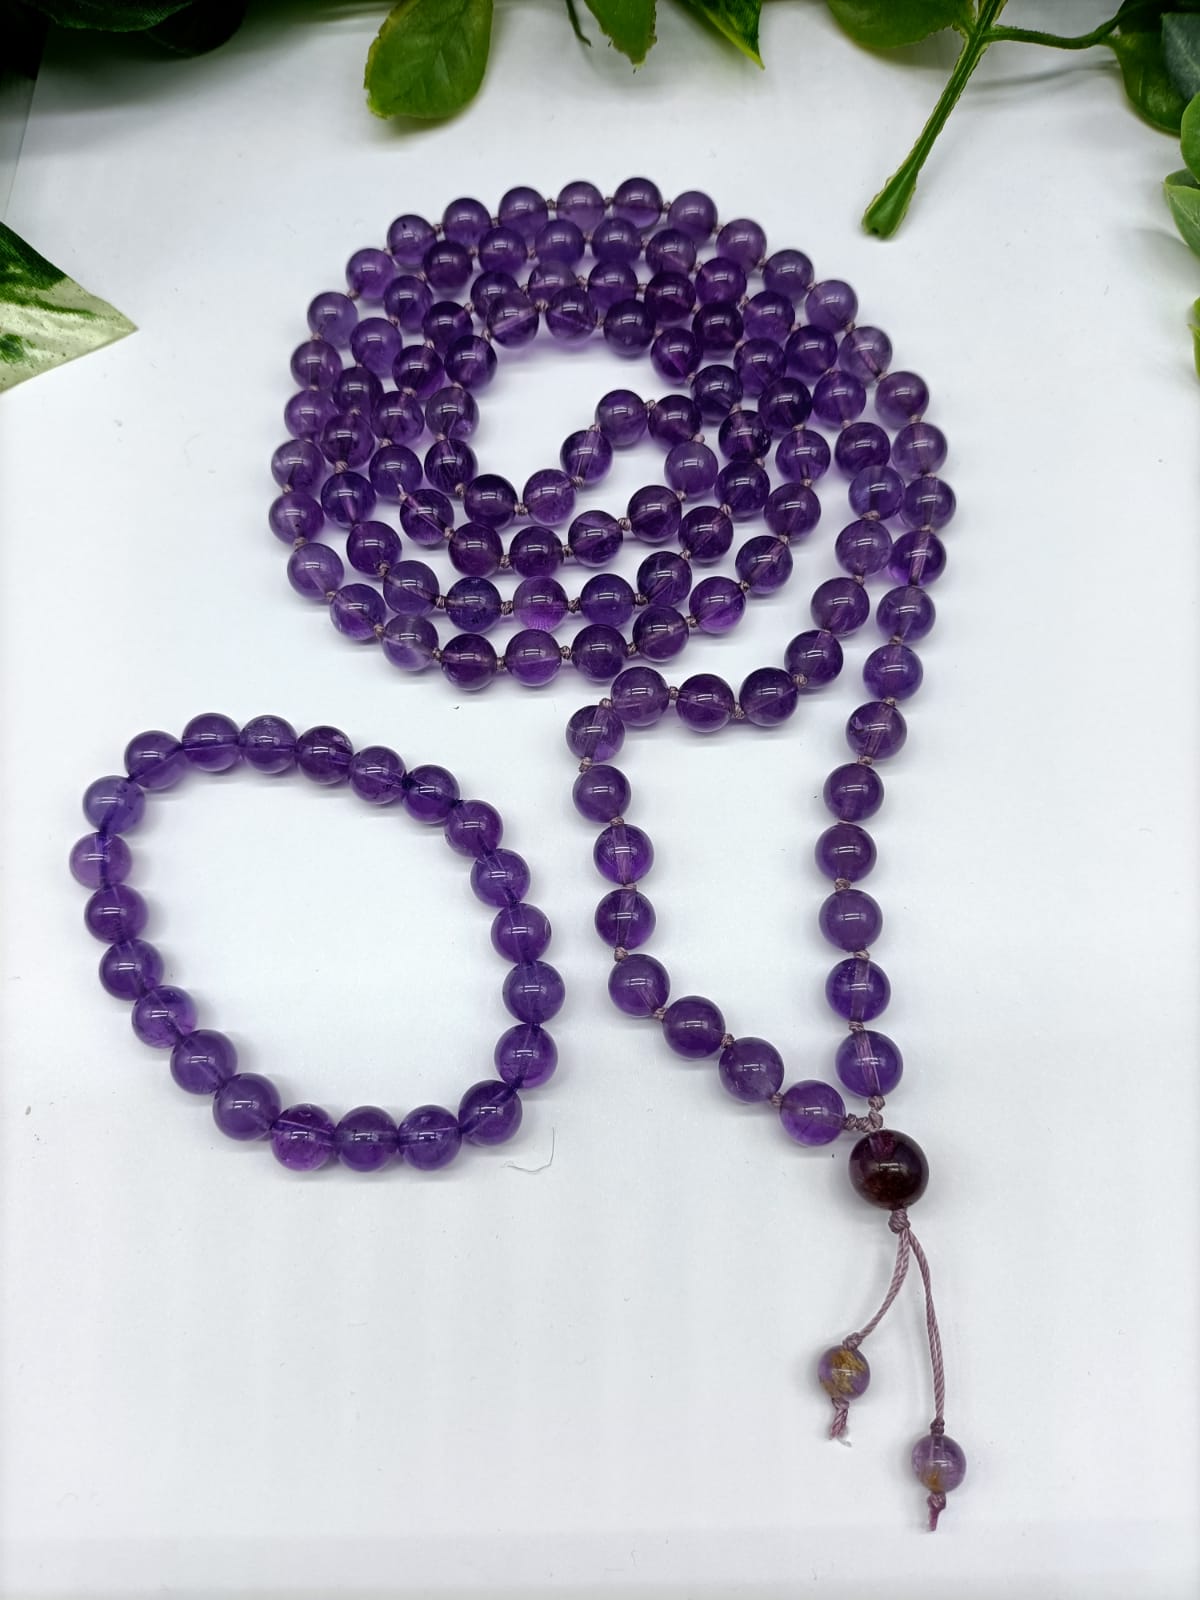 Amethyst Mala Beads 8mm with Bracelet Included - Crystal Wellness